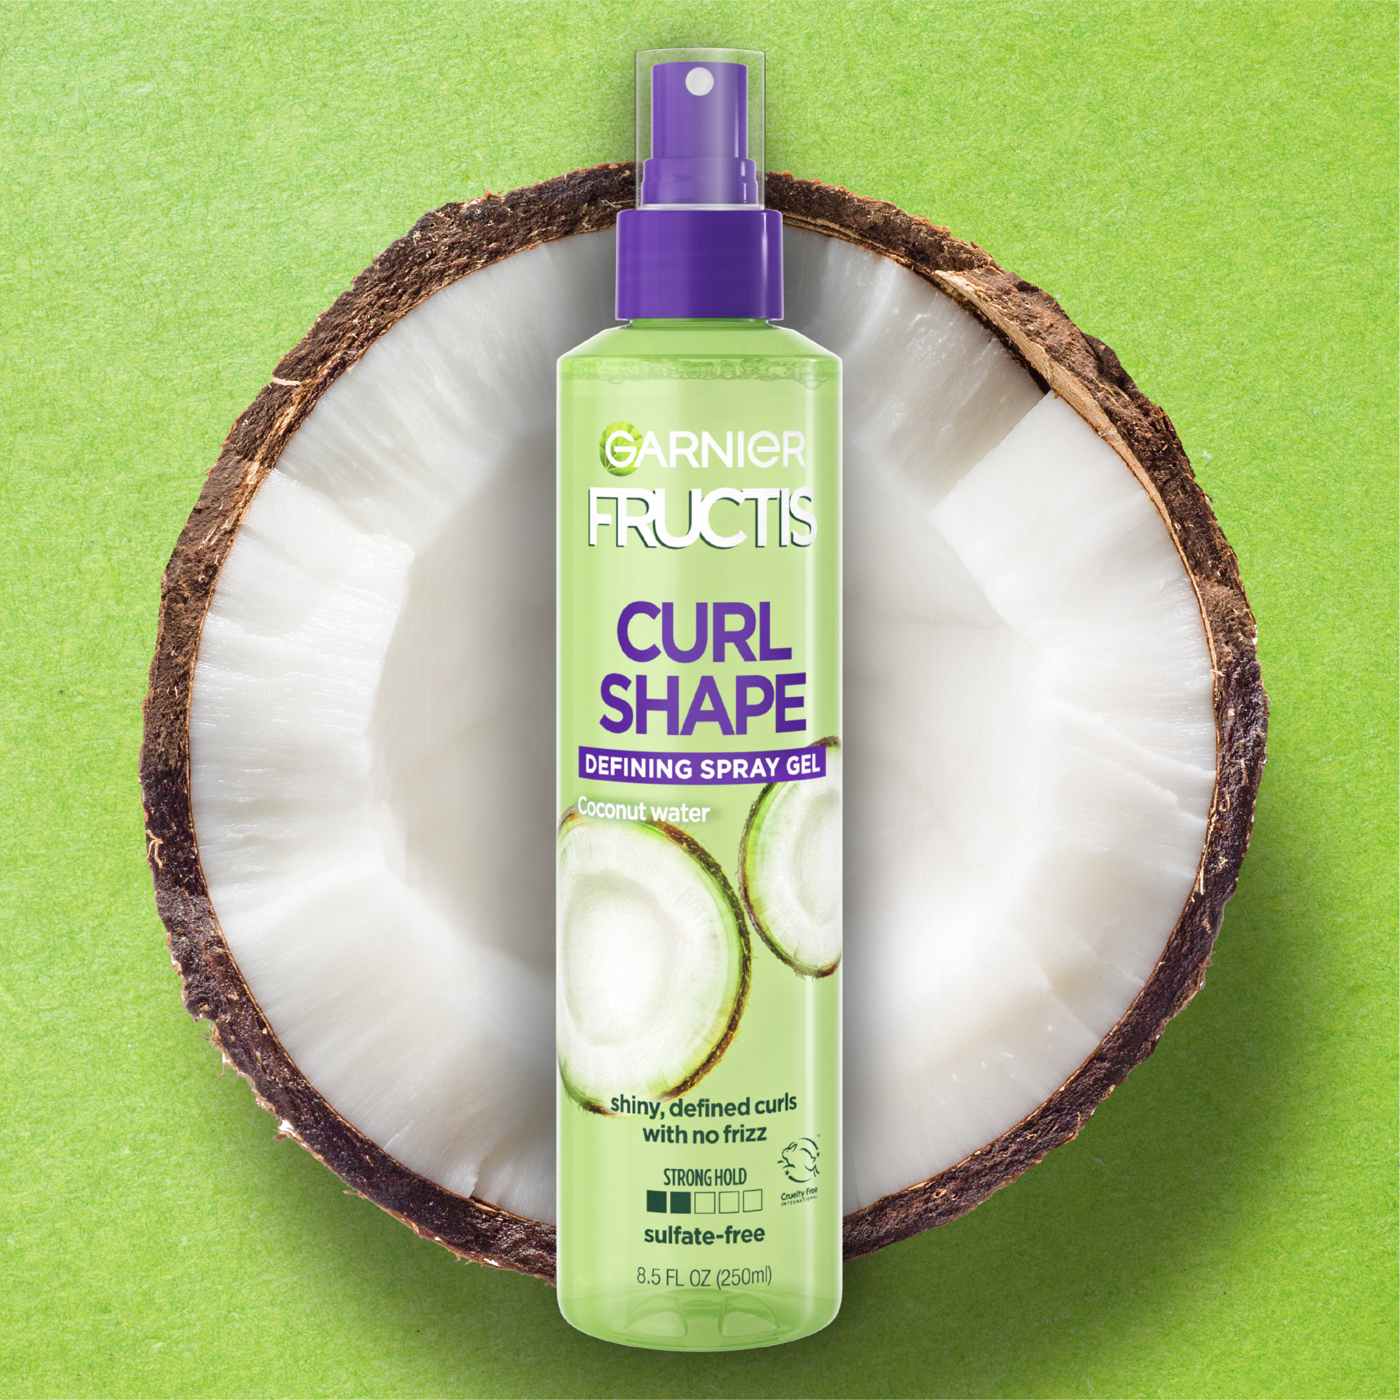 Garnier Fructis Style Curl Shape Defining Spray Gel with Coconut Water; image 3 of 9